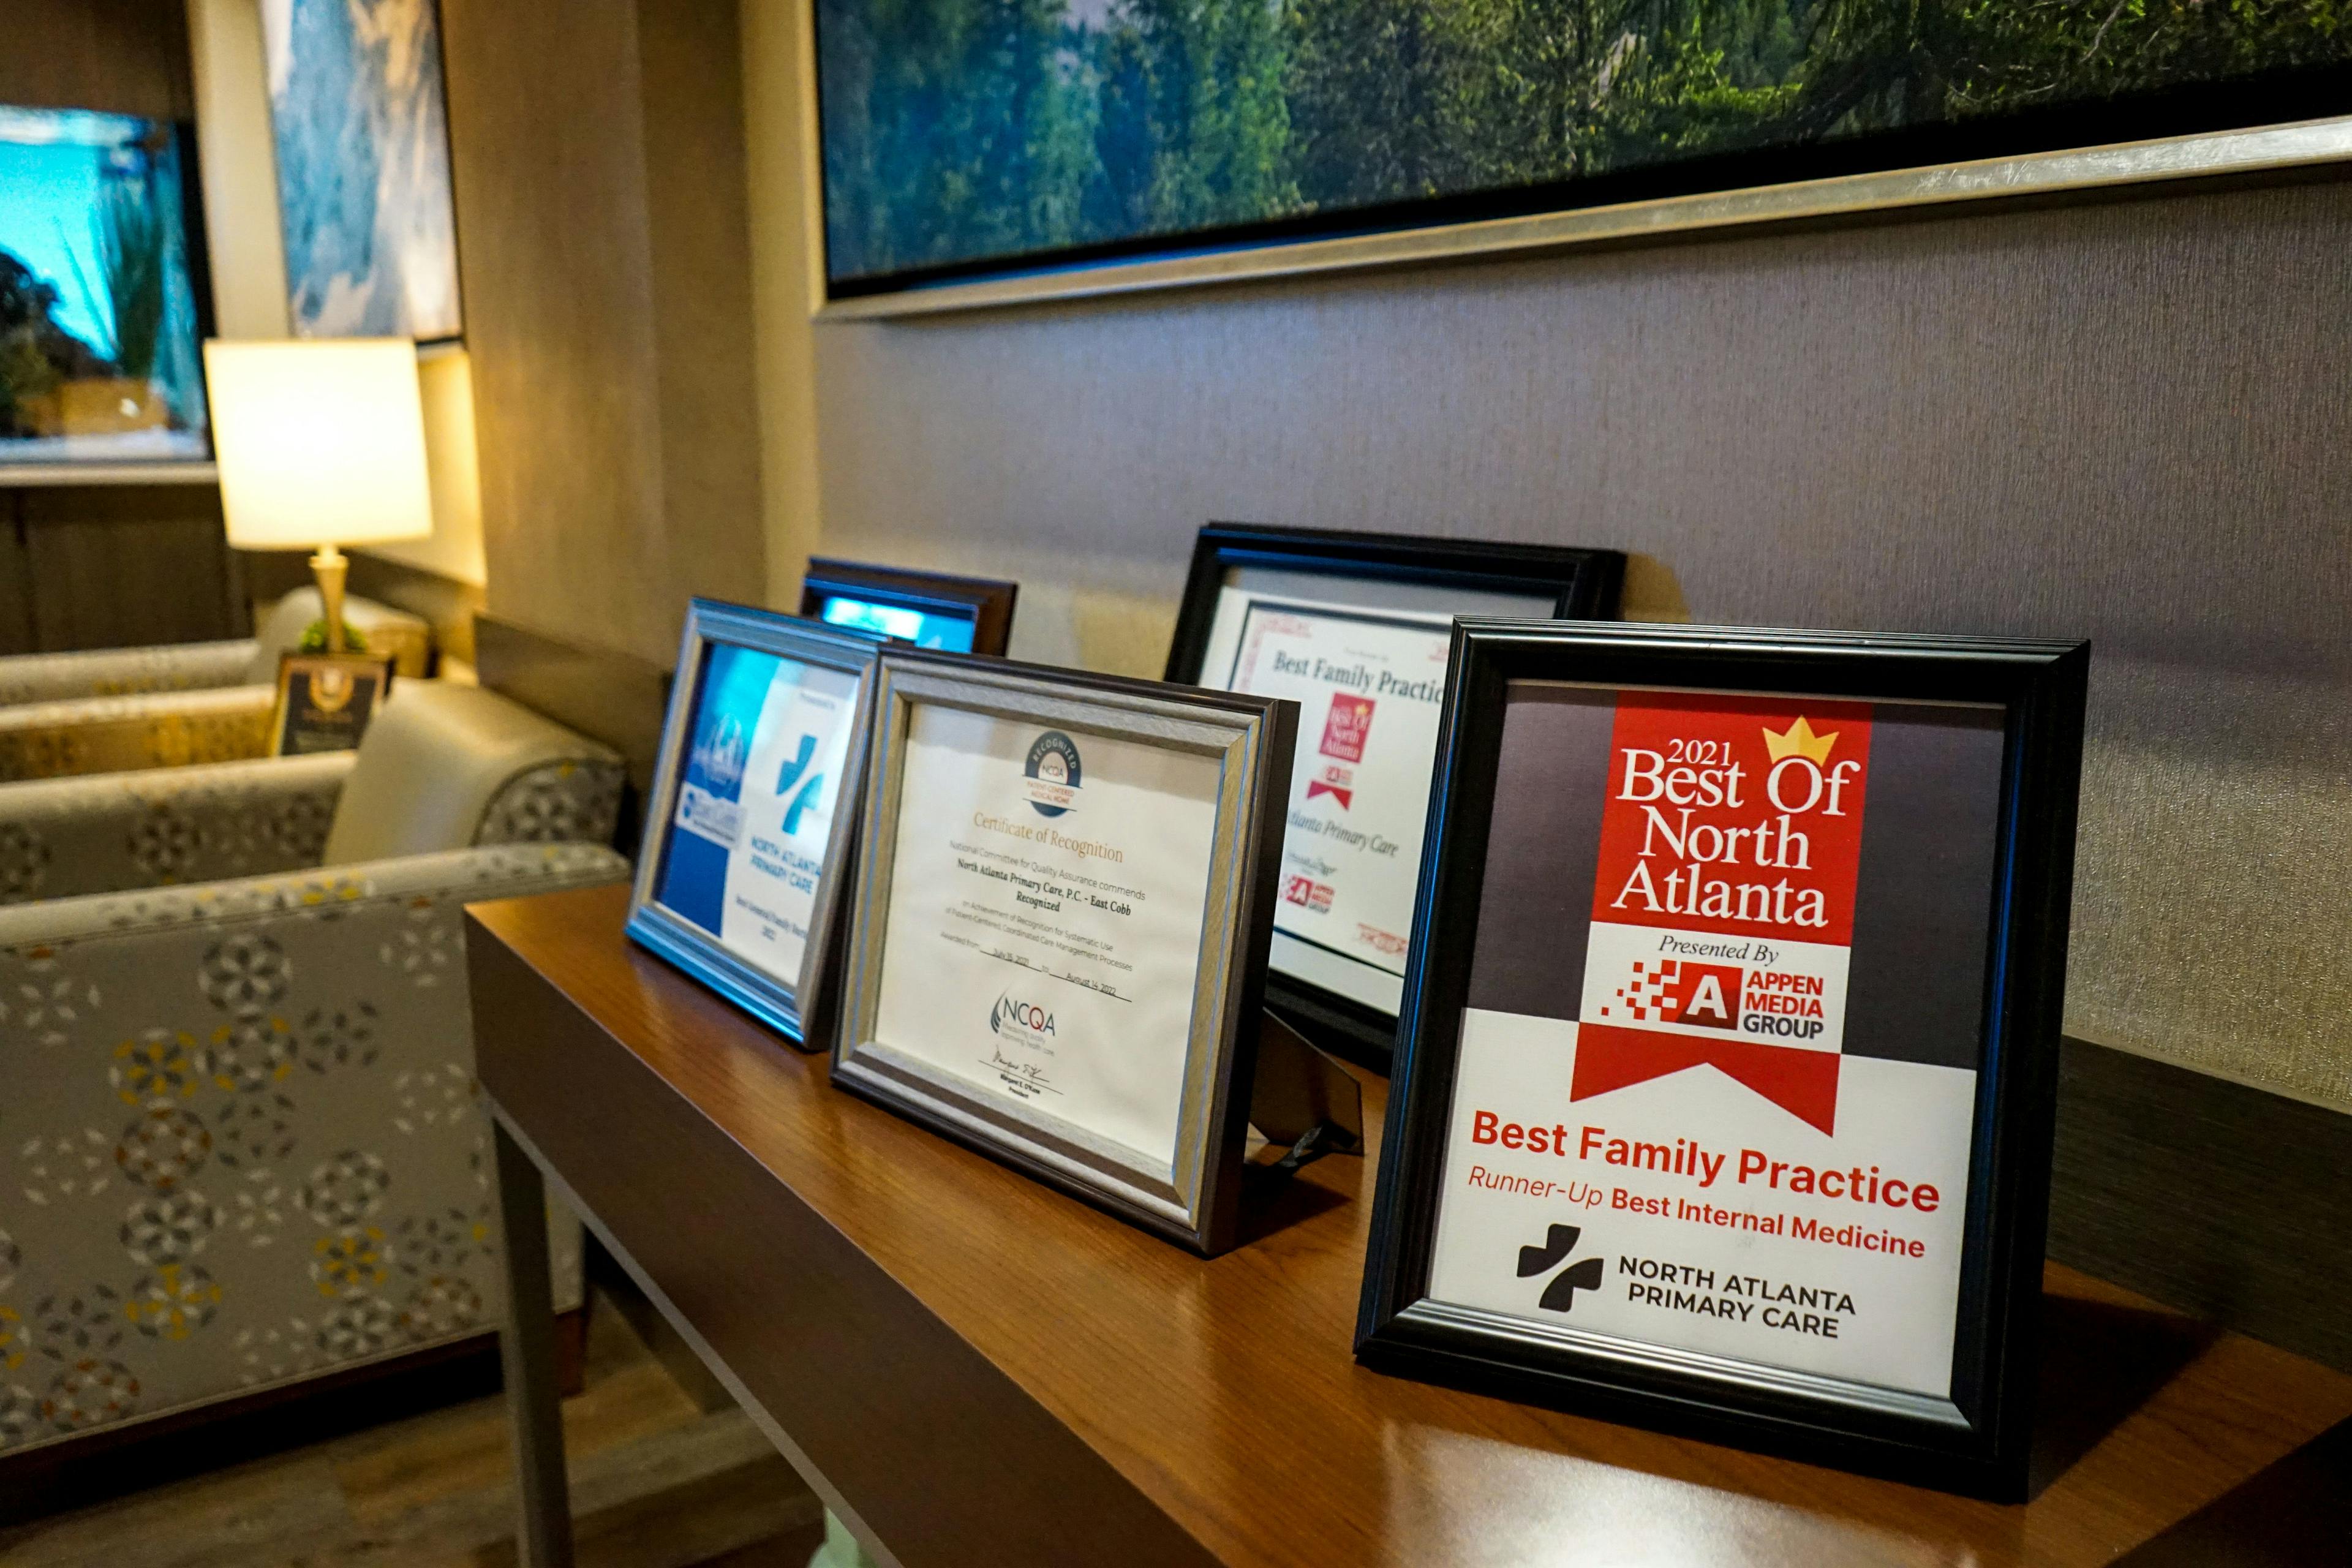 a row of framed certificates are sitting on a wooden table .